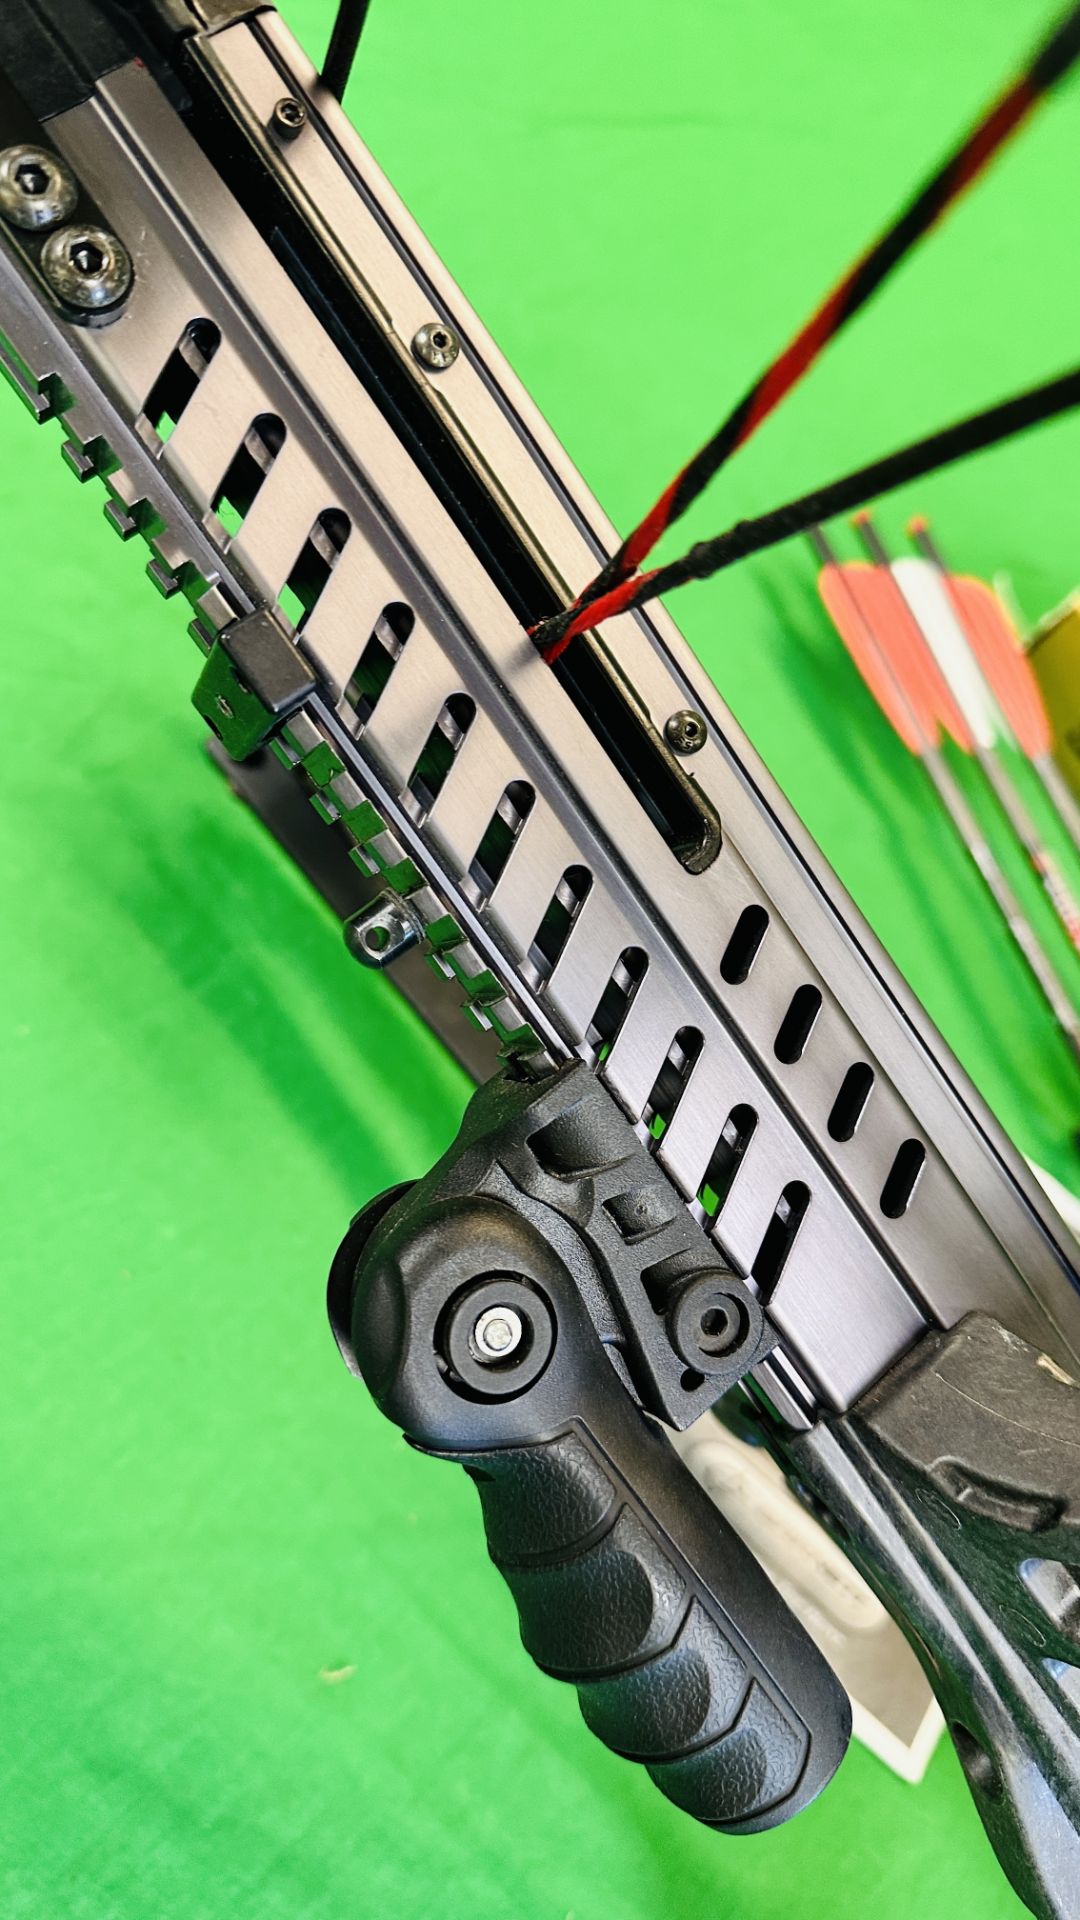 BARNETT "VENGANCE" COMPOUND CROSSBOW COMPLETE WITH THREE CARBON FIBRE CROSSBOW BOLTS, QUIVER, - Image 30 of 35